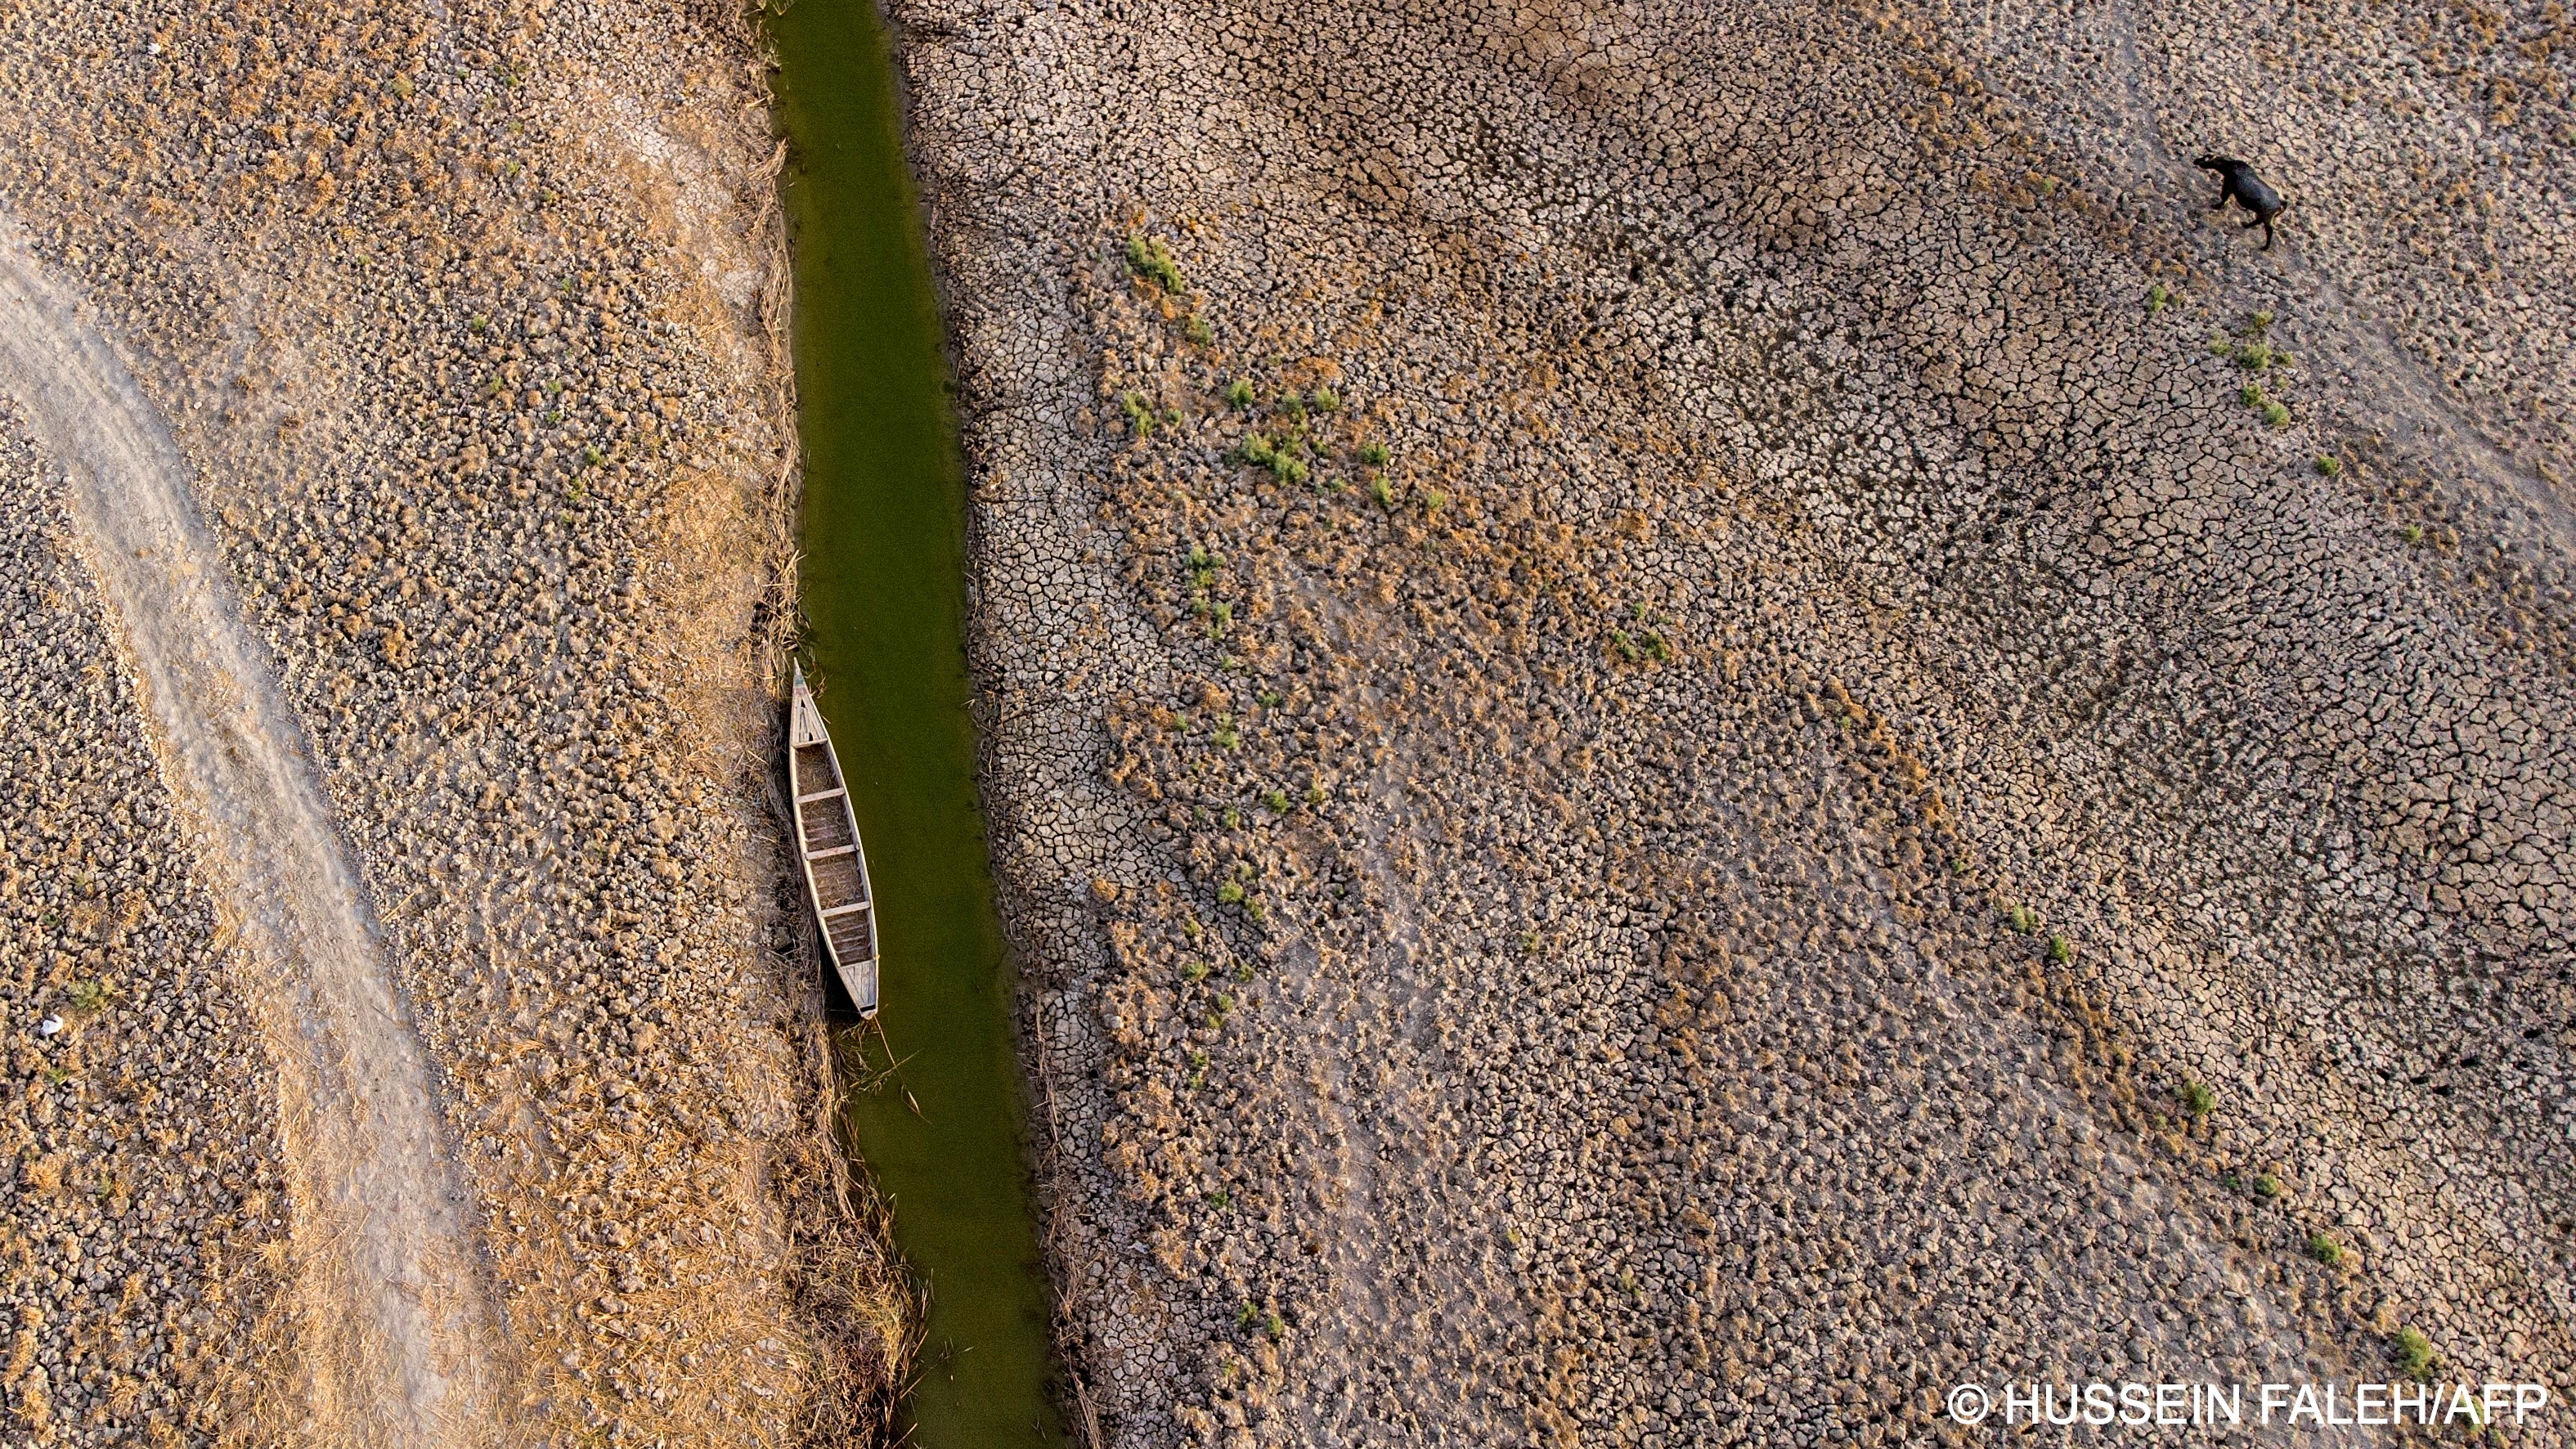 The Euphrates, which passes through Diwaniyah province, has visibly contracted in recent months, with some of the river's weaker branches drying up (photo: Haidar INDHAR/AFP)